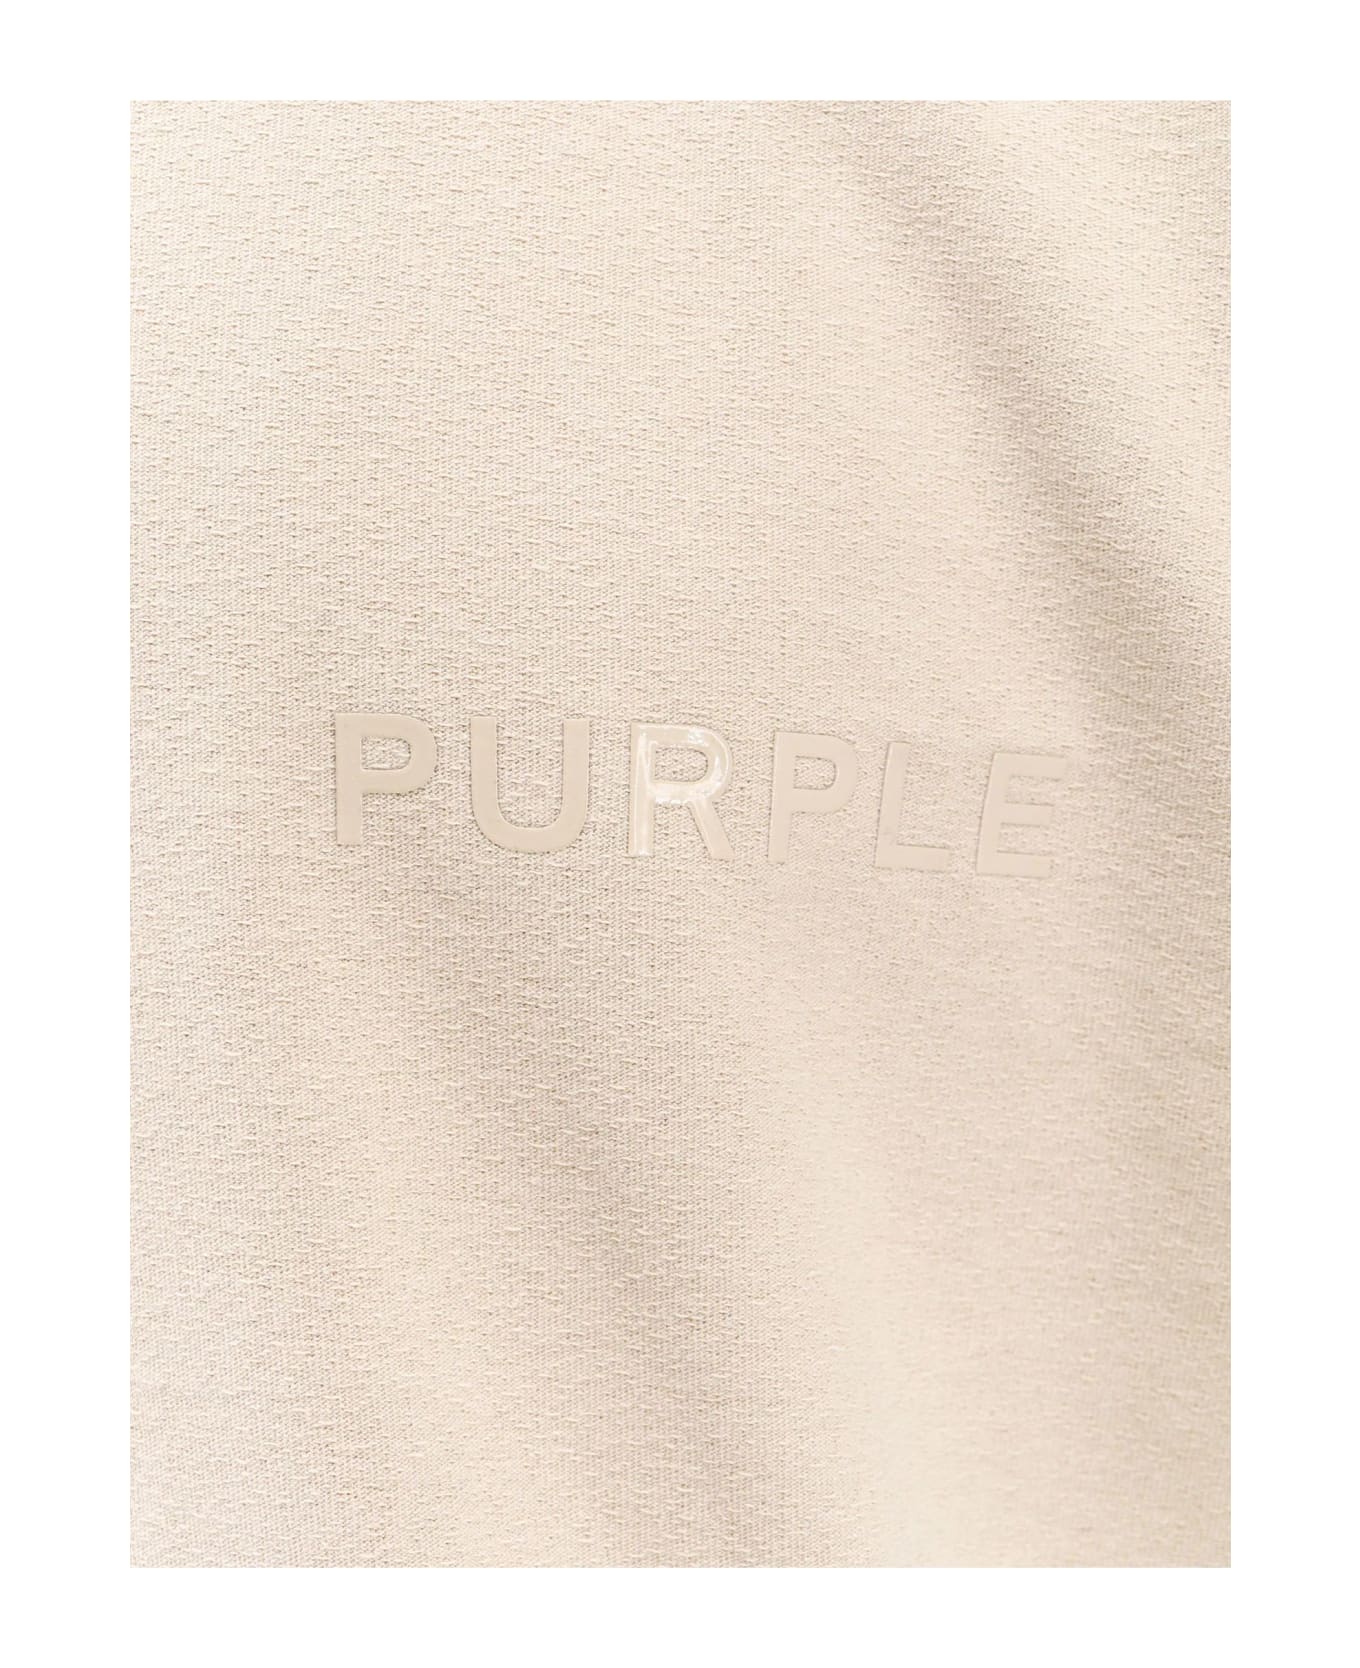 Purple Brand T-shirts And Polos Beige - Beige